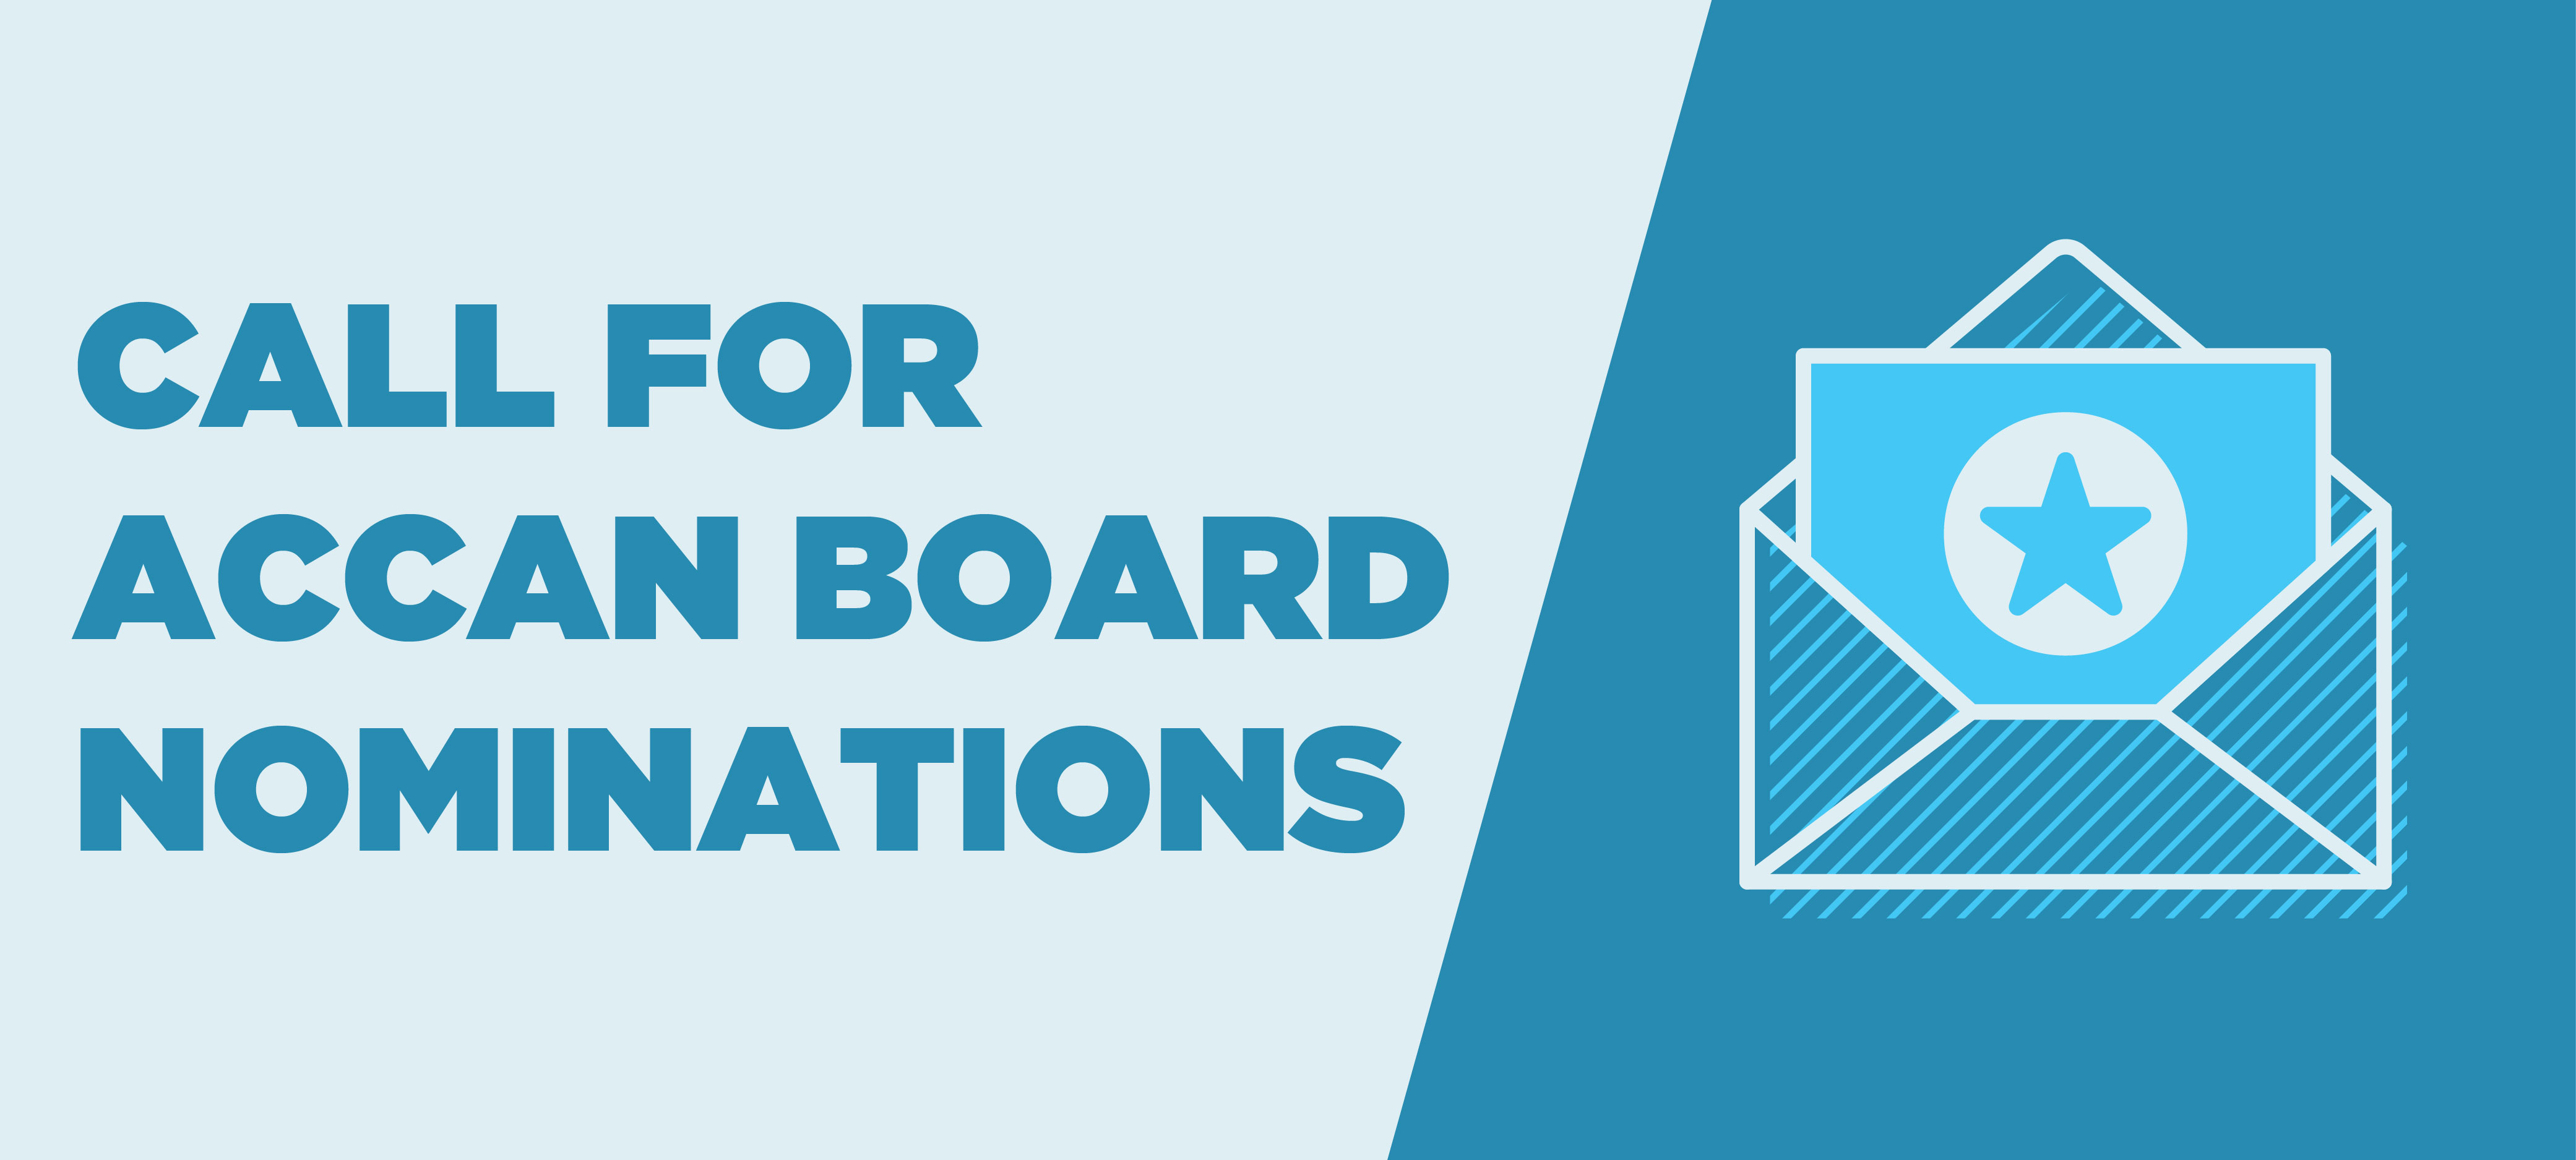 Call for ACCAN Board nominations